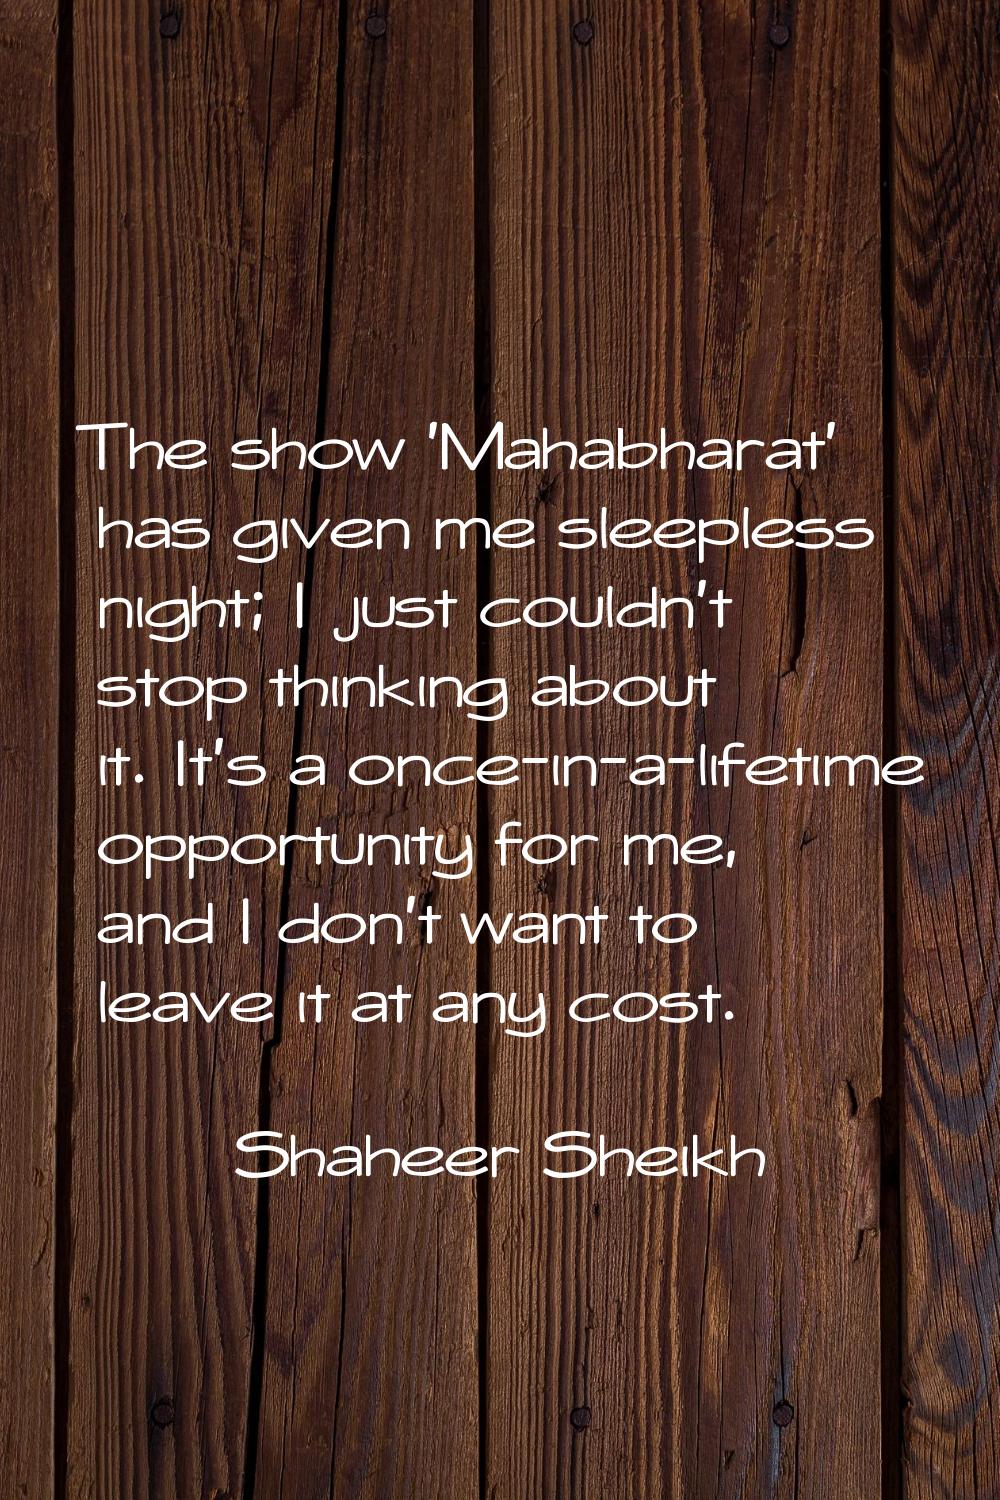 The show 'Mahabharat' has given me sleepless night; I just couldn't stop thinking about it. It's a 